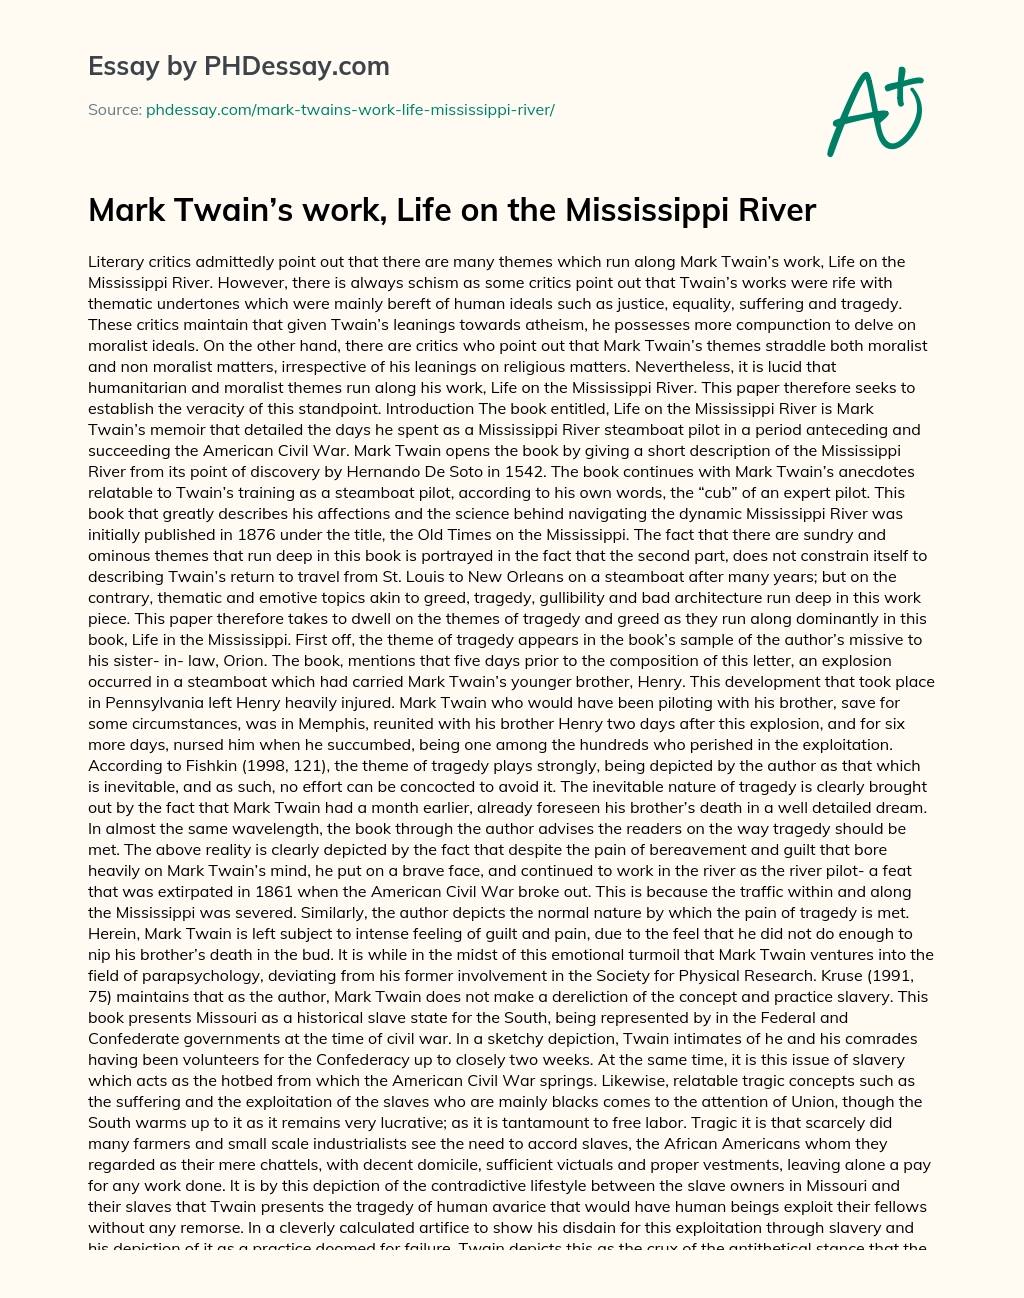 Mark Twain’s work, Life on the Mississippi River essay